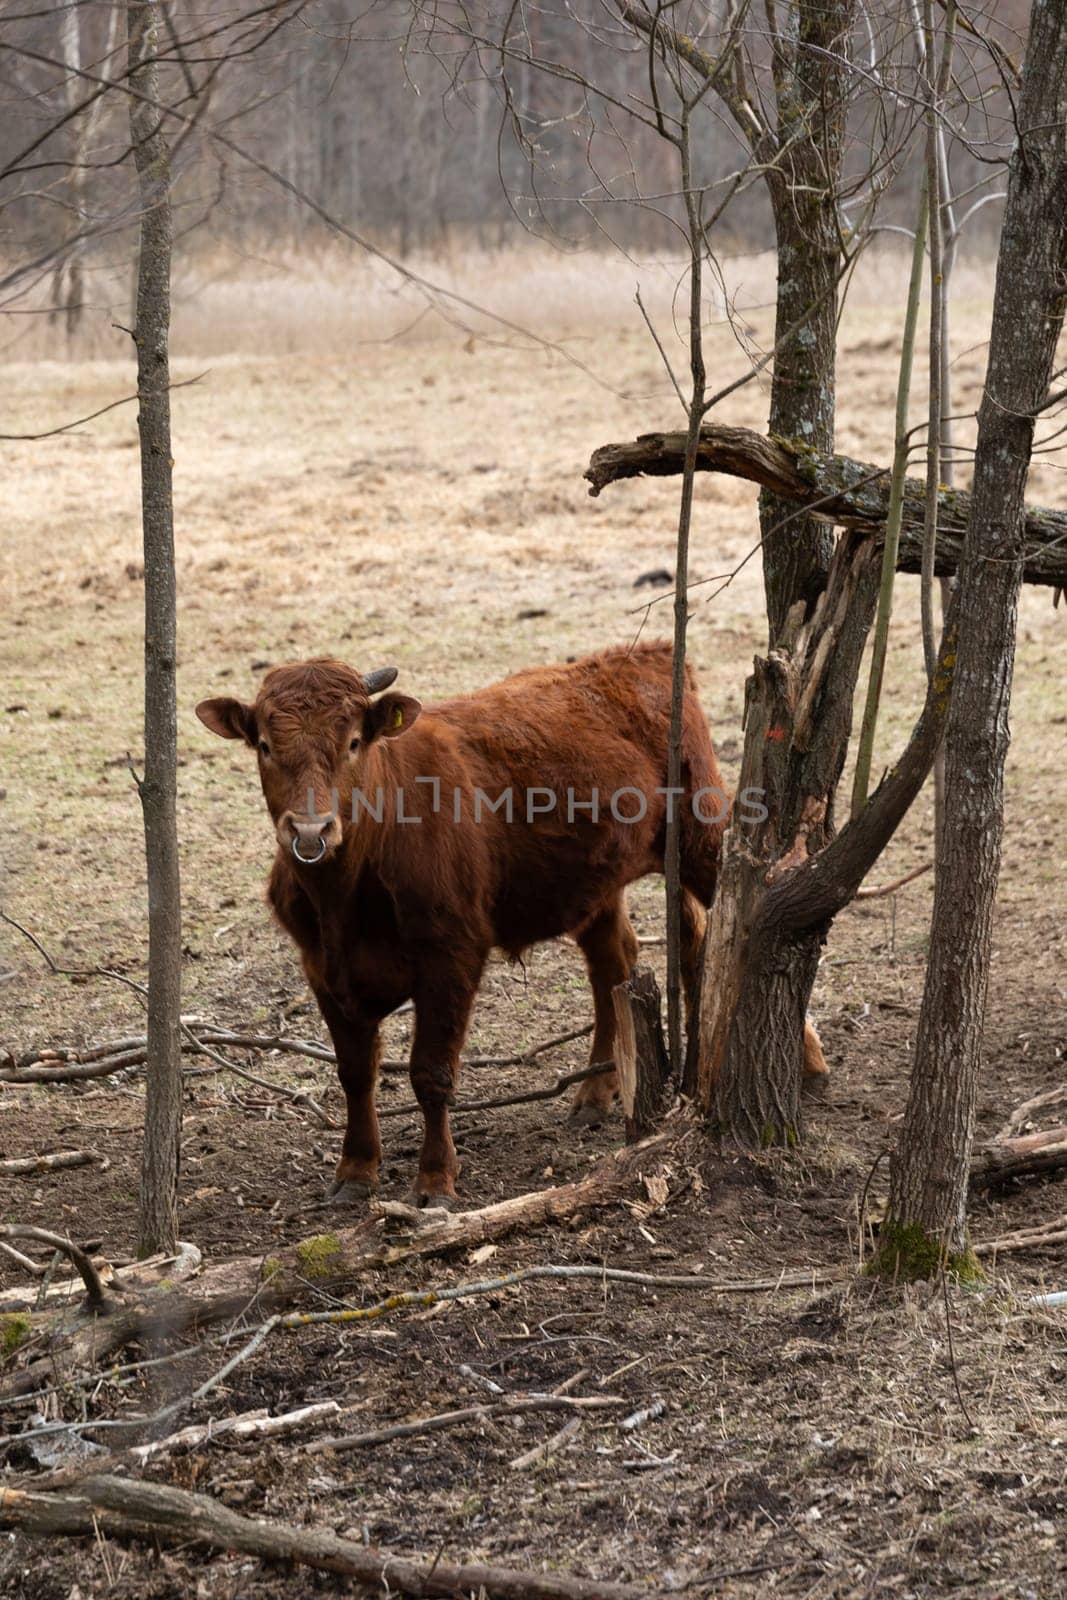 A brown cow is standing next to a tree in a dense forest. The cow is calmly grazing on the lush green grass next to the tall tree.